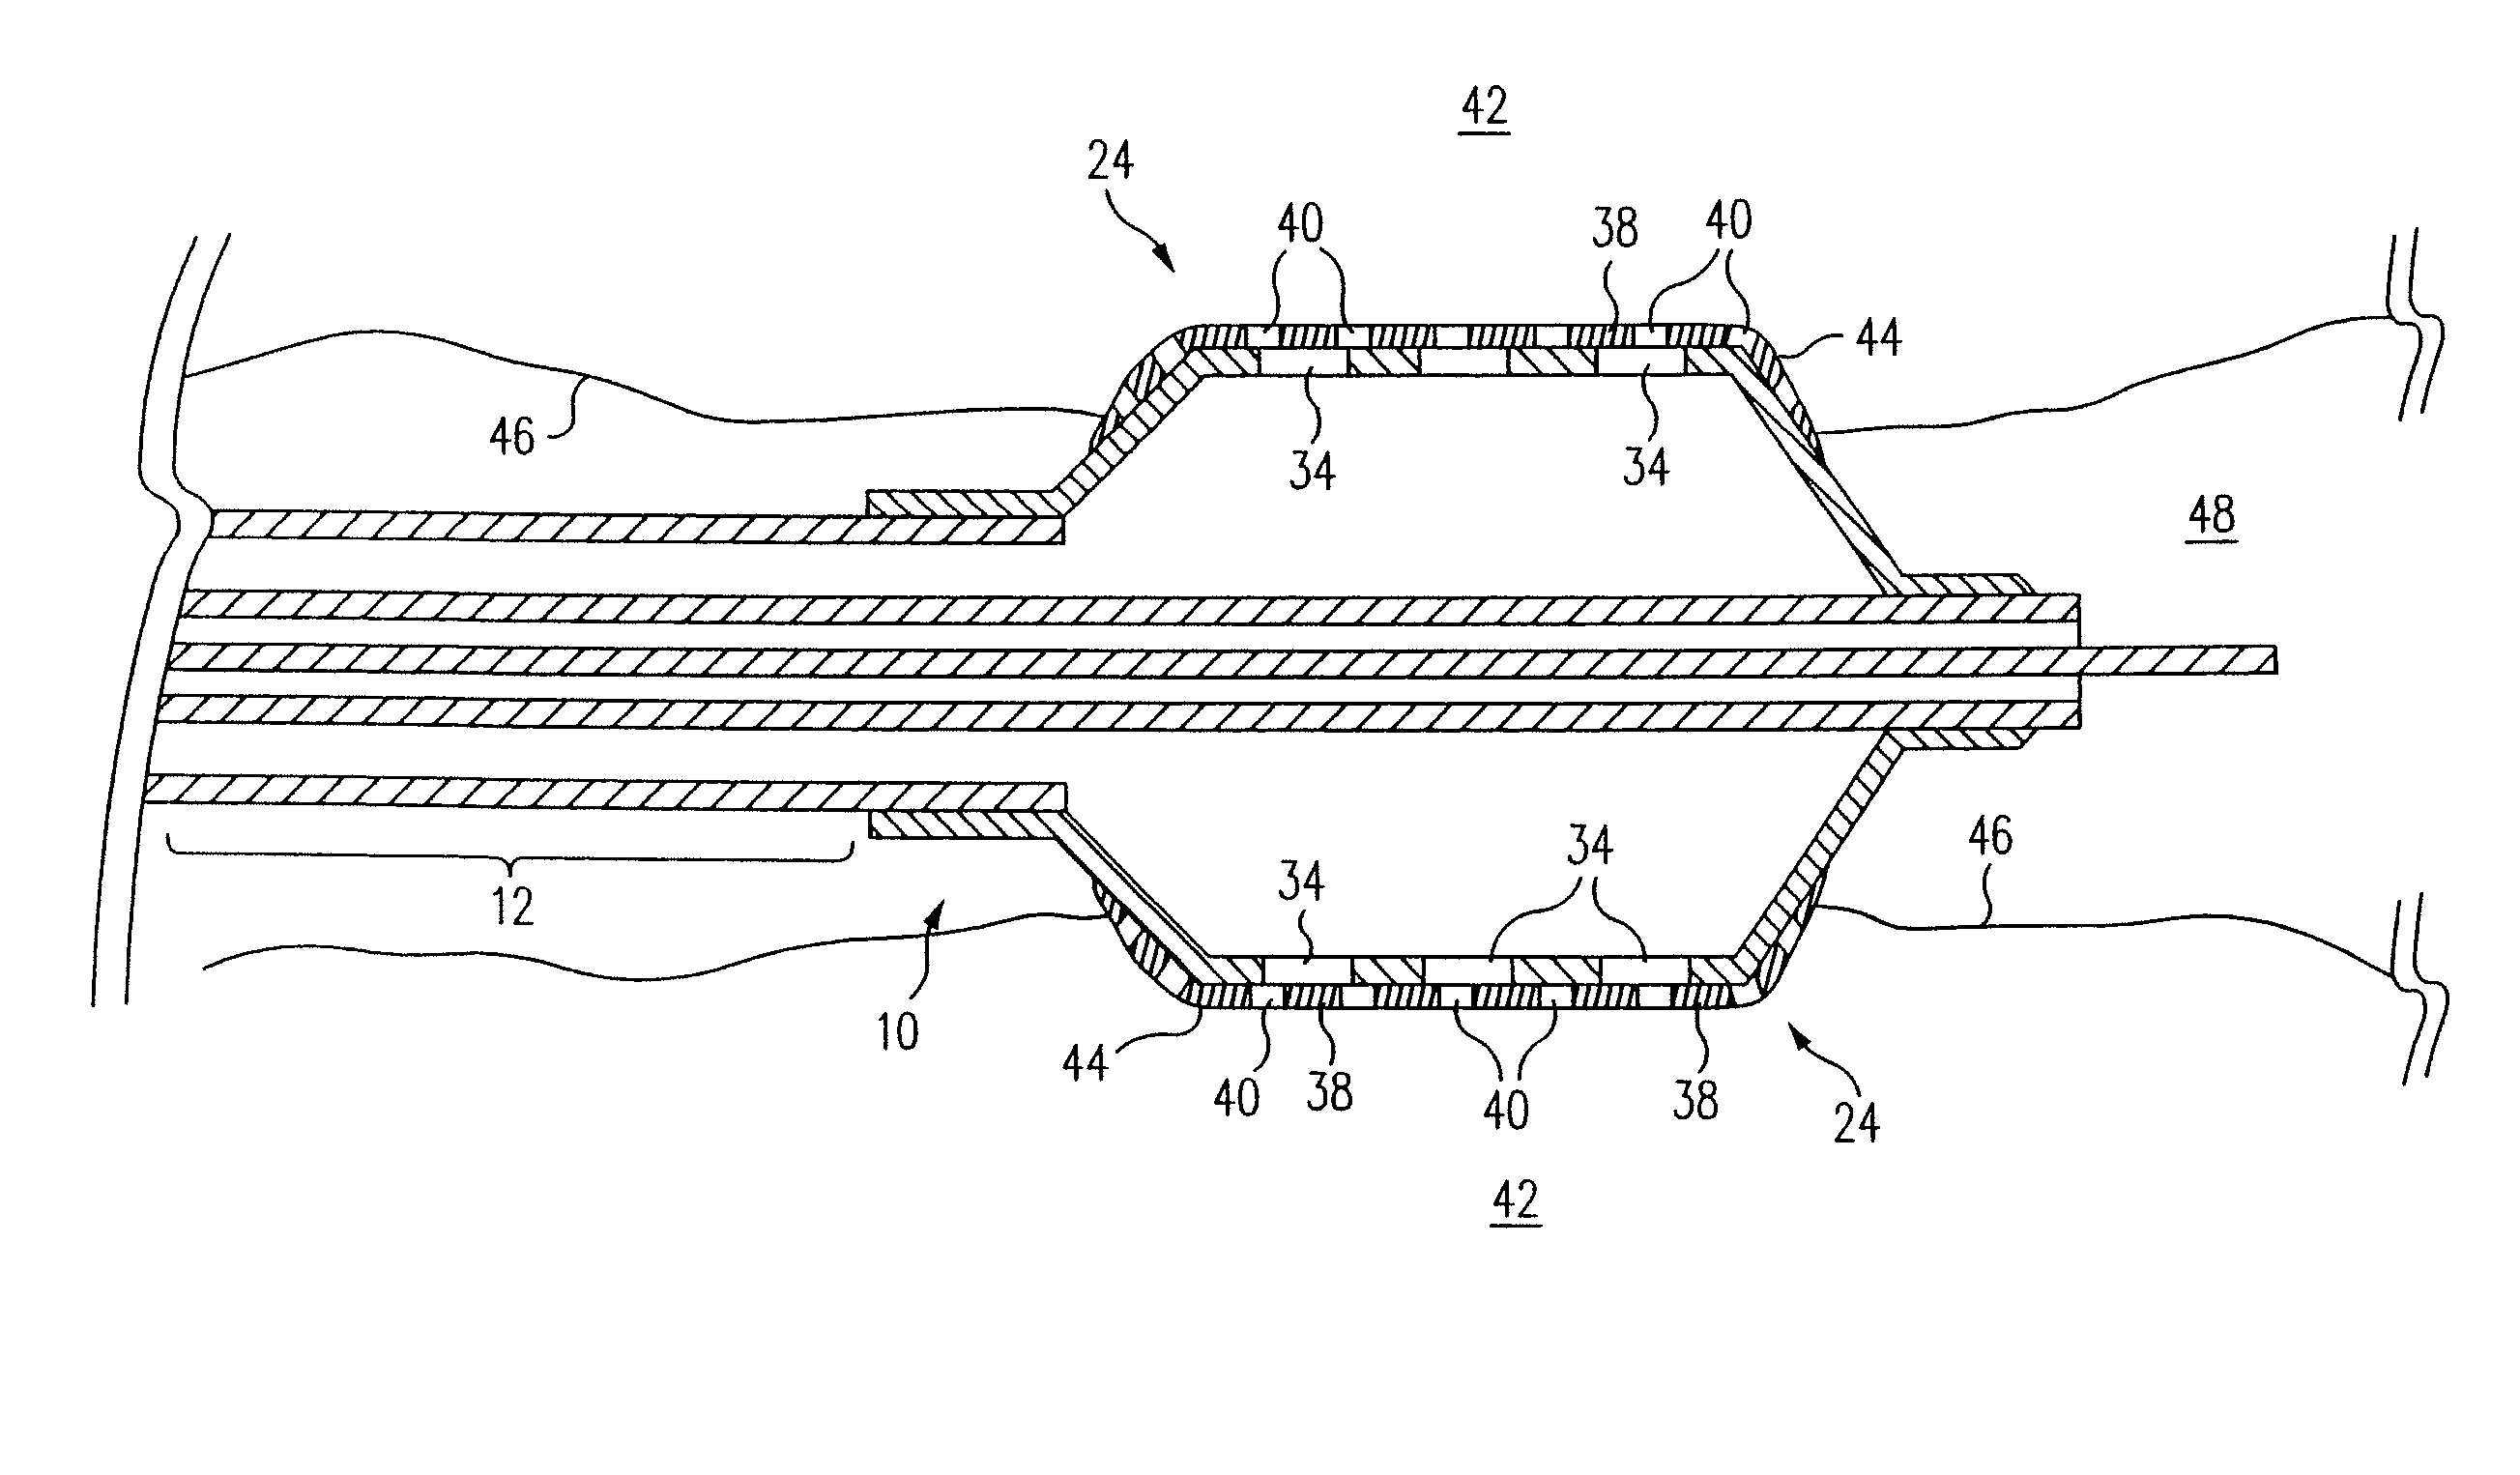 Balloon catheter for delivering therapeutic agents